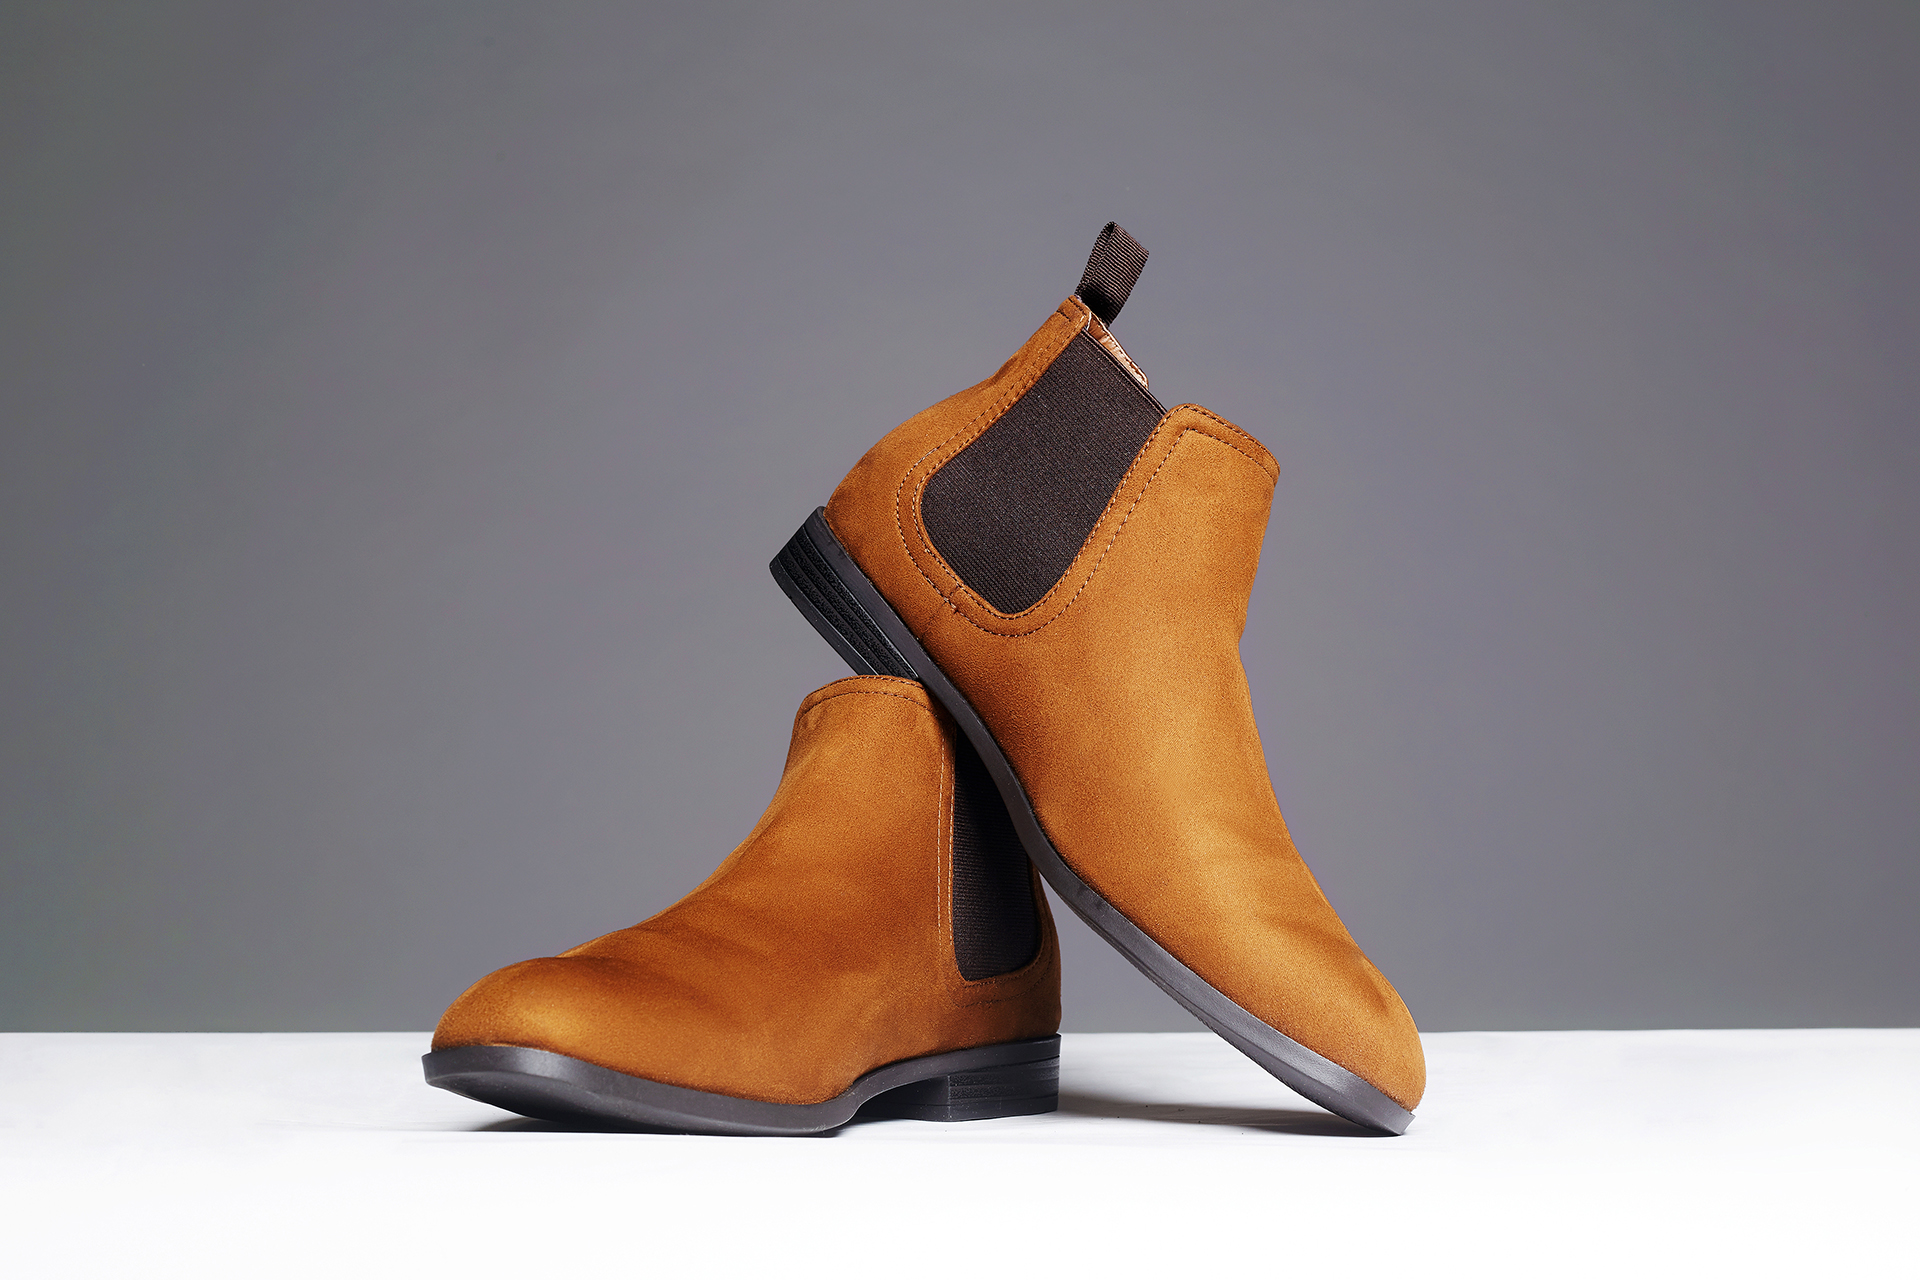 Borgerskab Latter kombination Different Ways to Wear Chelsea Boots for Men - Suits Expert